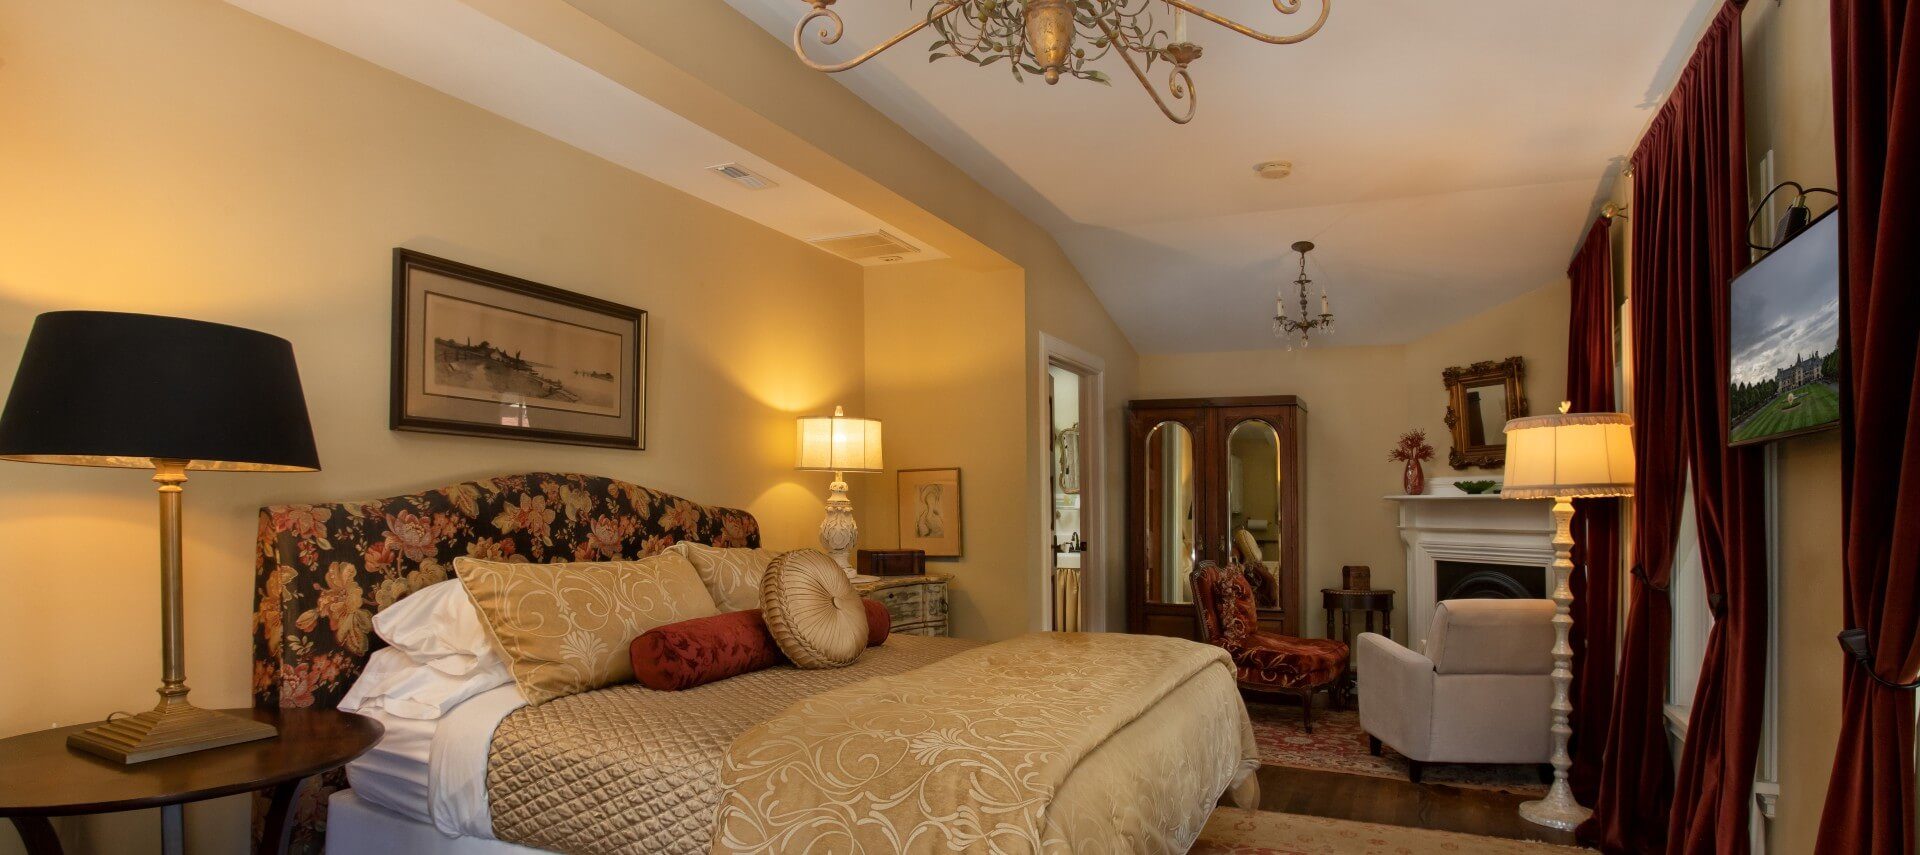 Bedroom with plush king-size bed, gas fireplace and sitting chairs